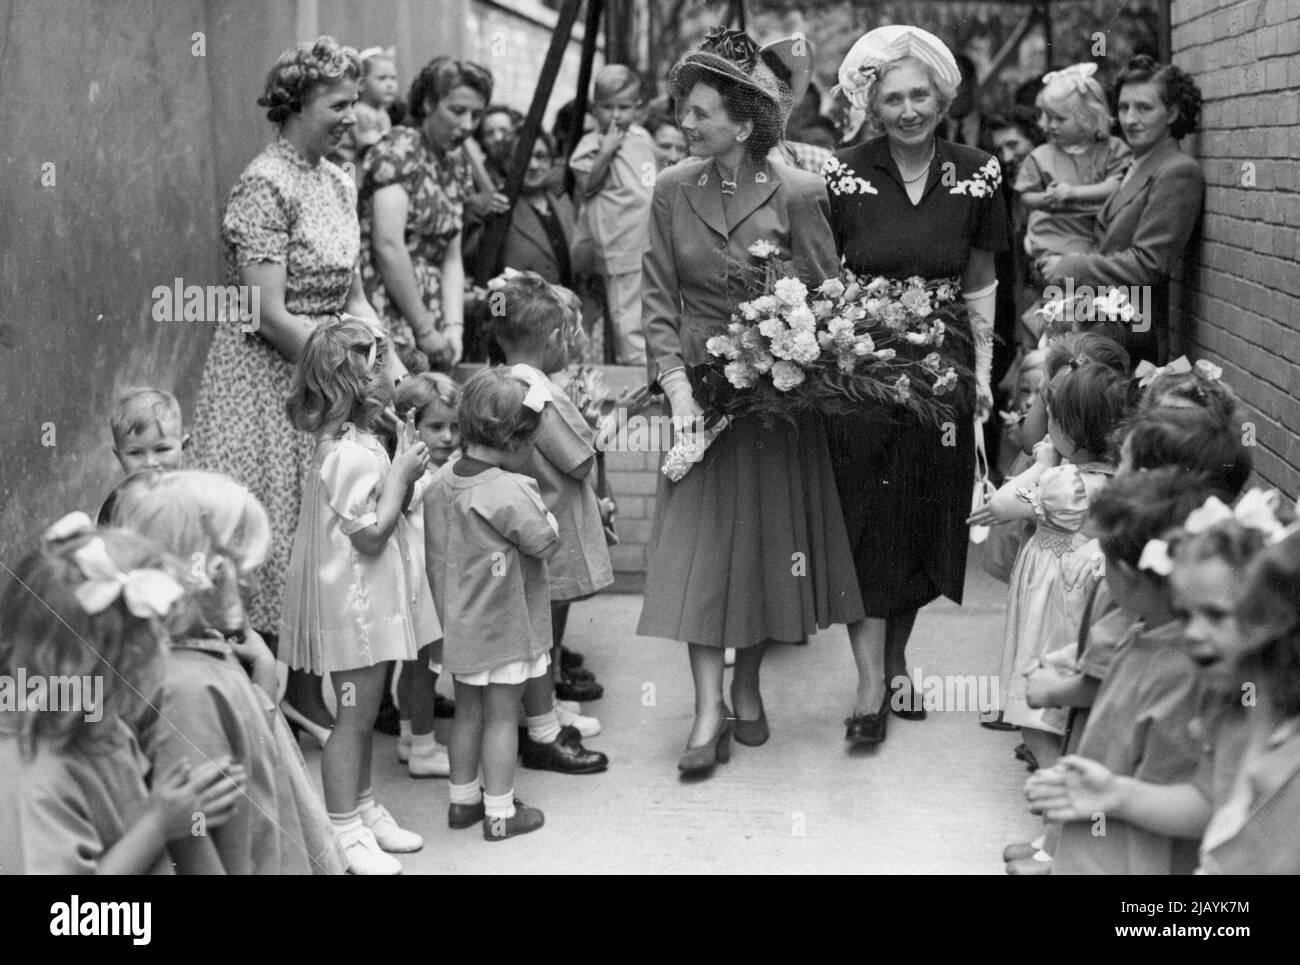 Duchess of Gloucester Opens North London Nursery School -- The Duchess of Gloucester arriving to open the nursery school, with little toddlers waiting to greet her. The Duchess of Gloucester today (Wednesday) opened North Islington Nursery School, Tollington Park, Stroud Green, London., Which is the first of its kind to be built since the war. It stands on the site of one which was destroyed by a bomb in 1940. Already the school has accepted 30 children, and there are 56 more on the waiting list. July 06, 1949. Stock Photo